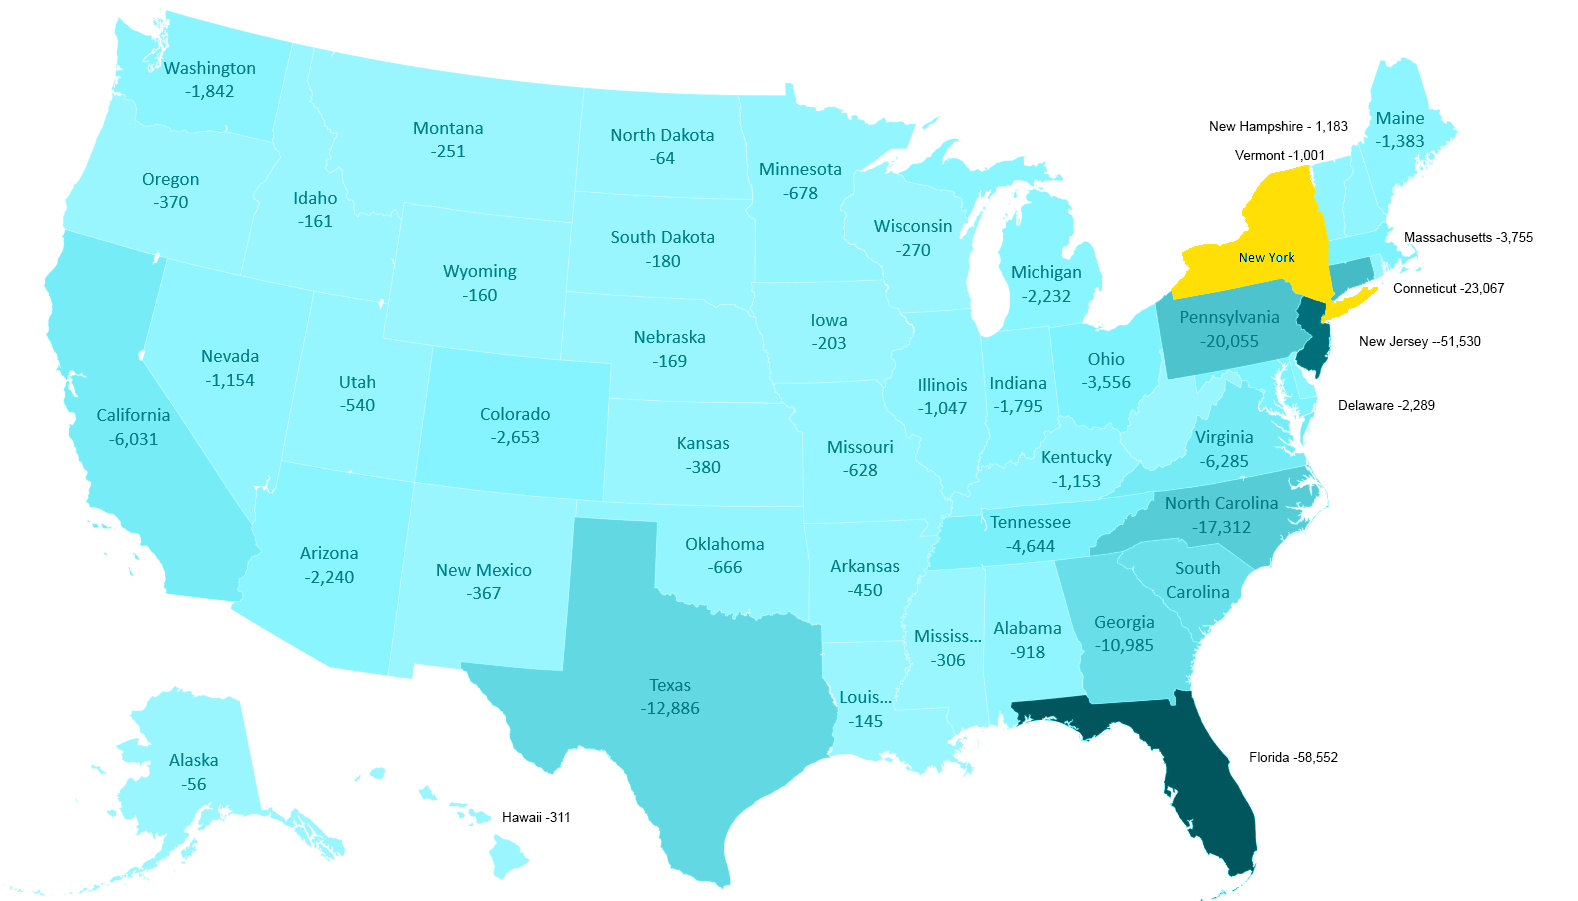 map of state-to-state migration data from 2019 to 2020